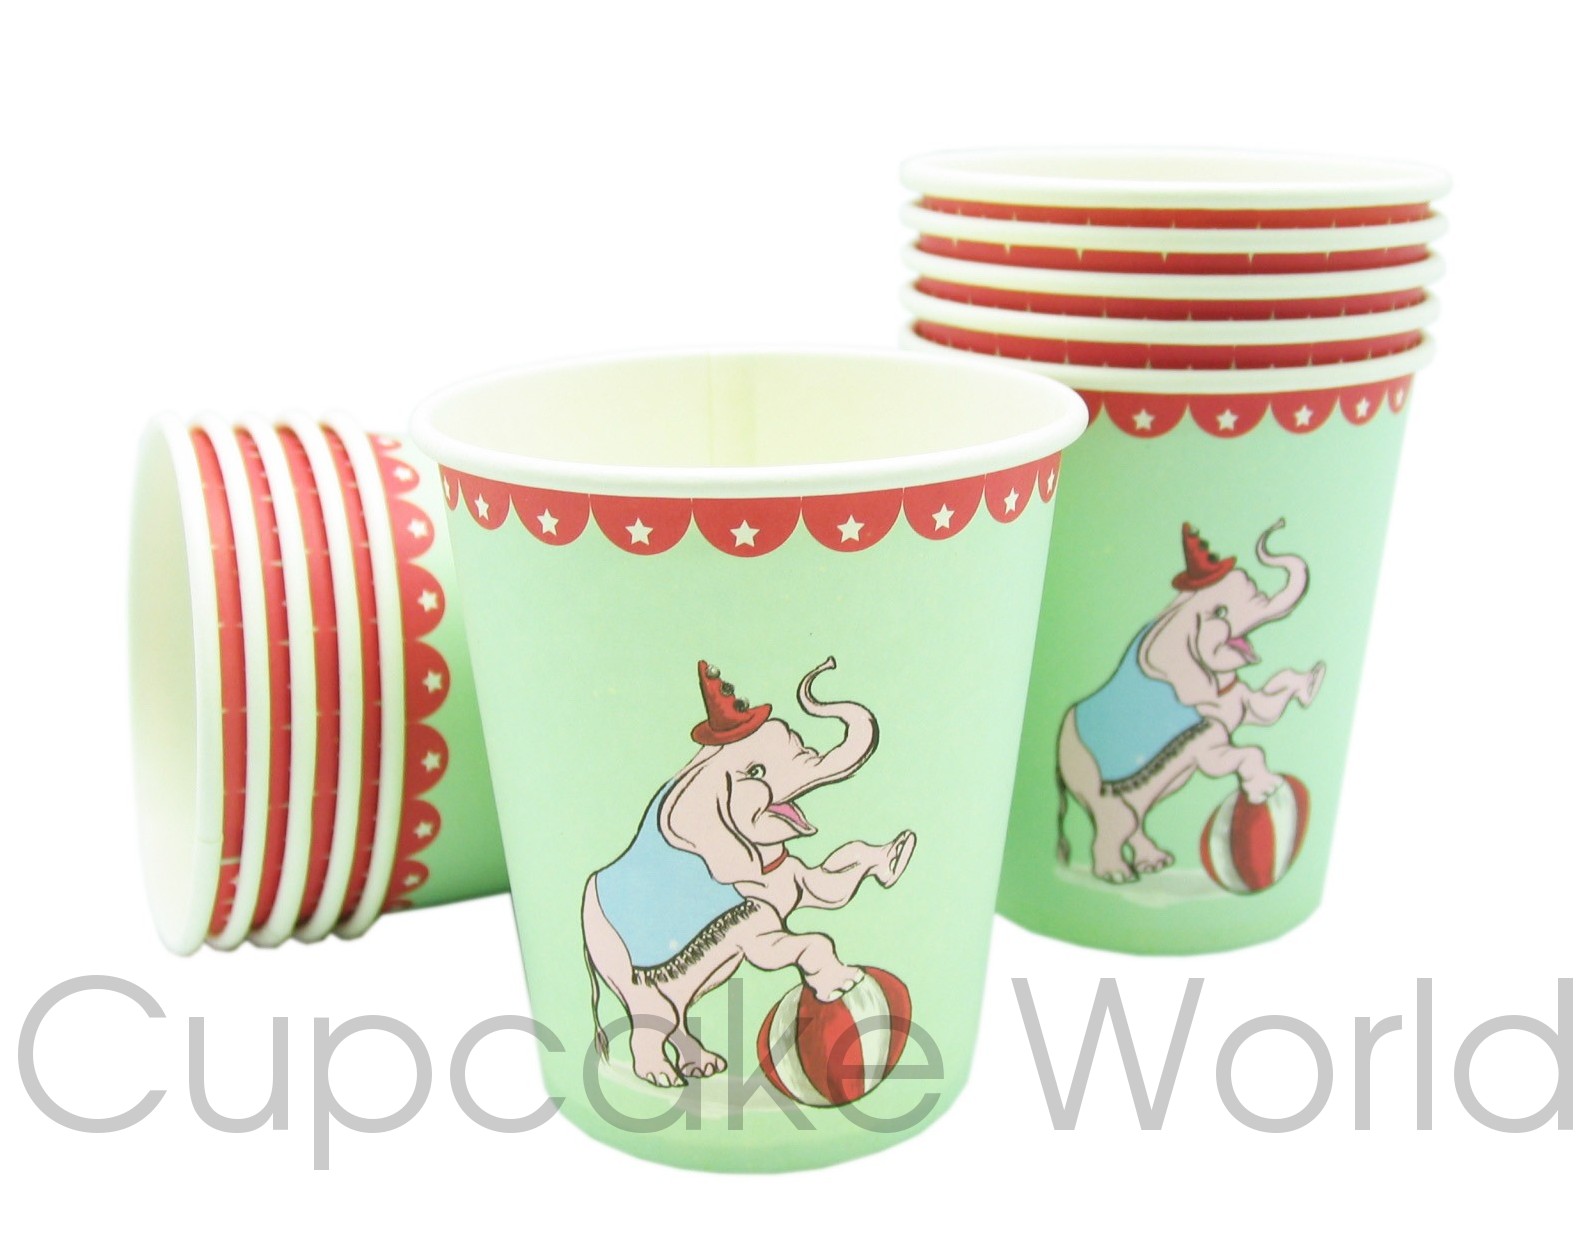 ROBERT GORDON MY LITTLE CIRCUS PARTY PAPER CUPS PACK OF 12 - $4.45 ...